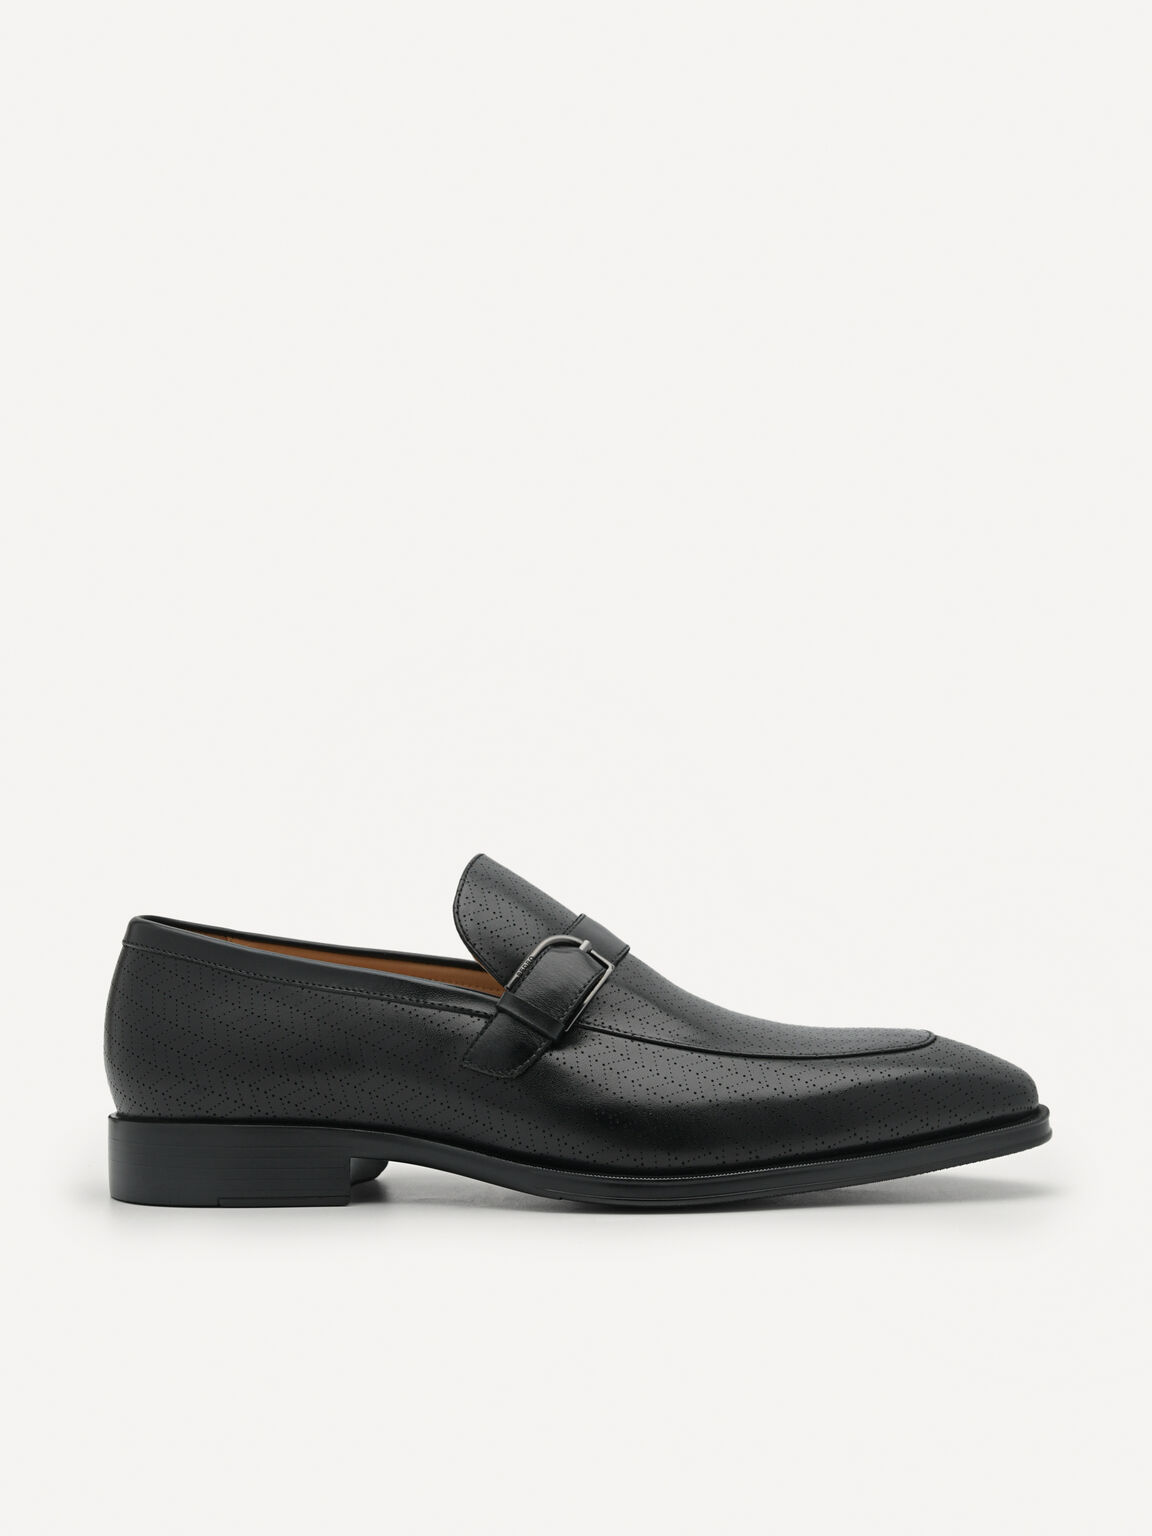 Leather Buckle Loafers, Black, hi-res